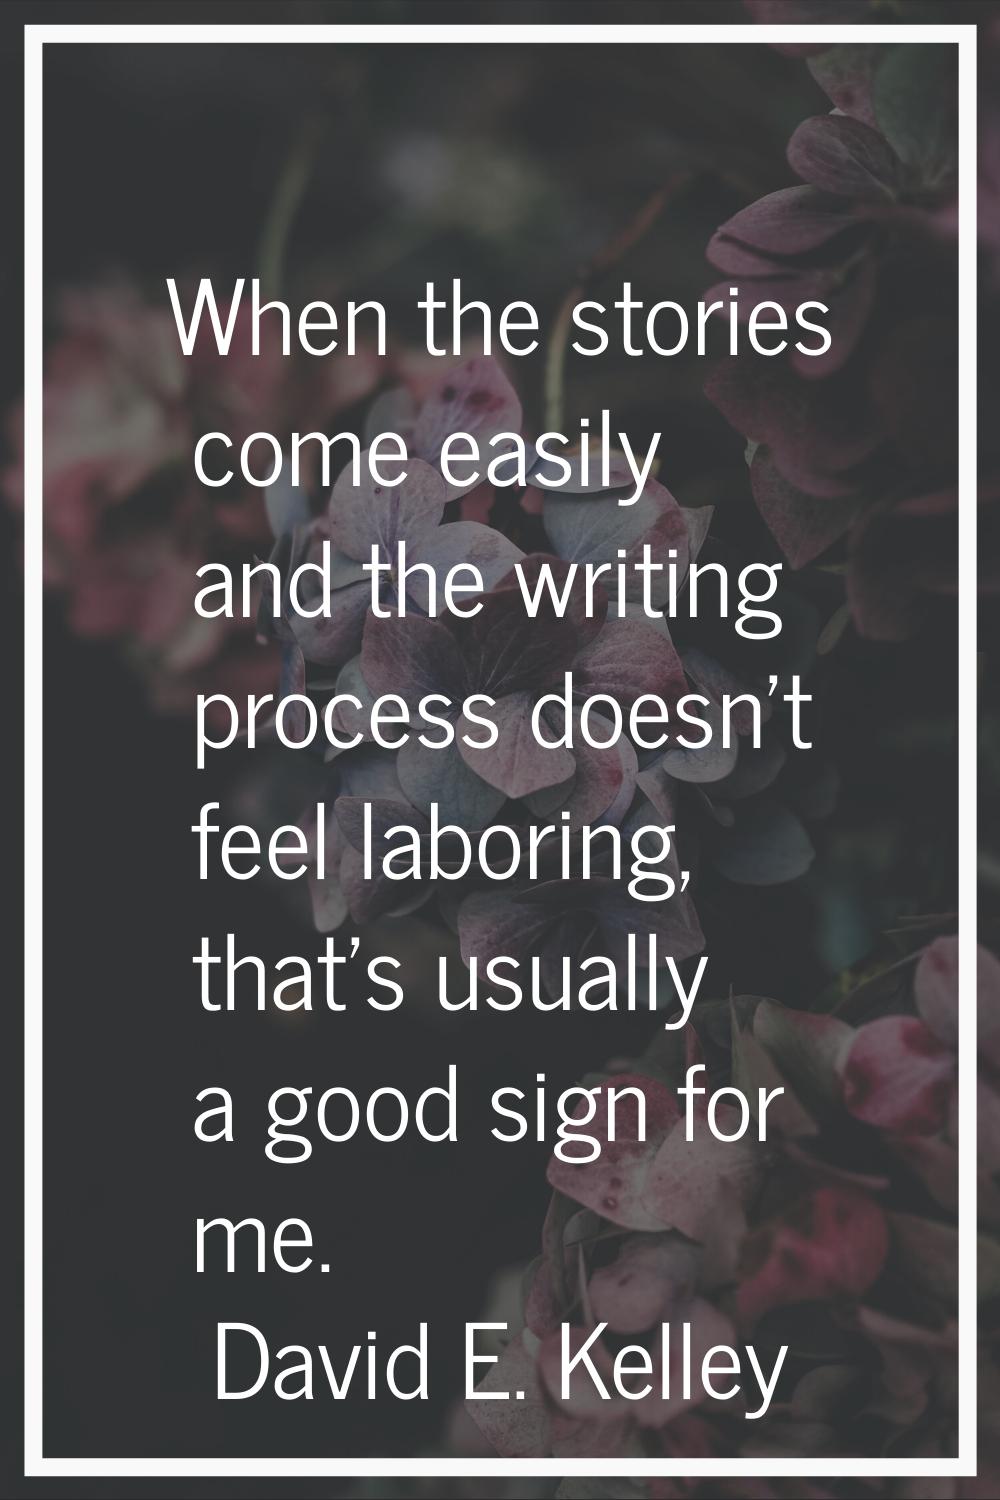 When the stories come easily and the writing process doesn't feel laboring, that's usually a good s